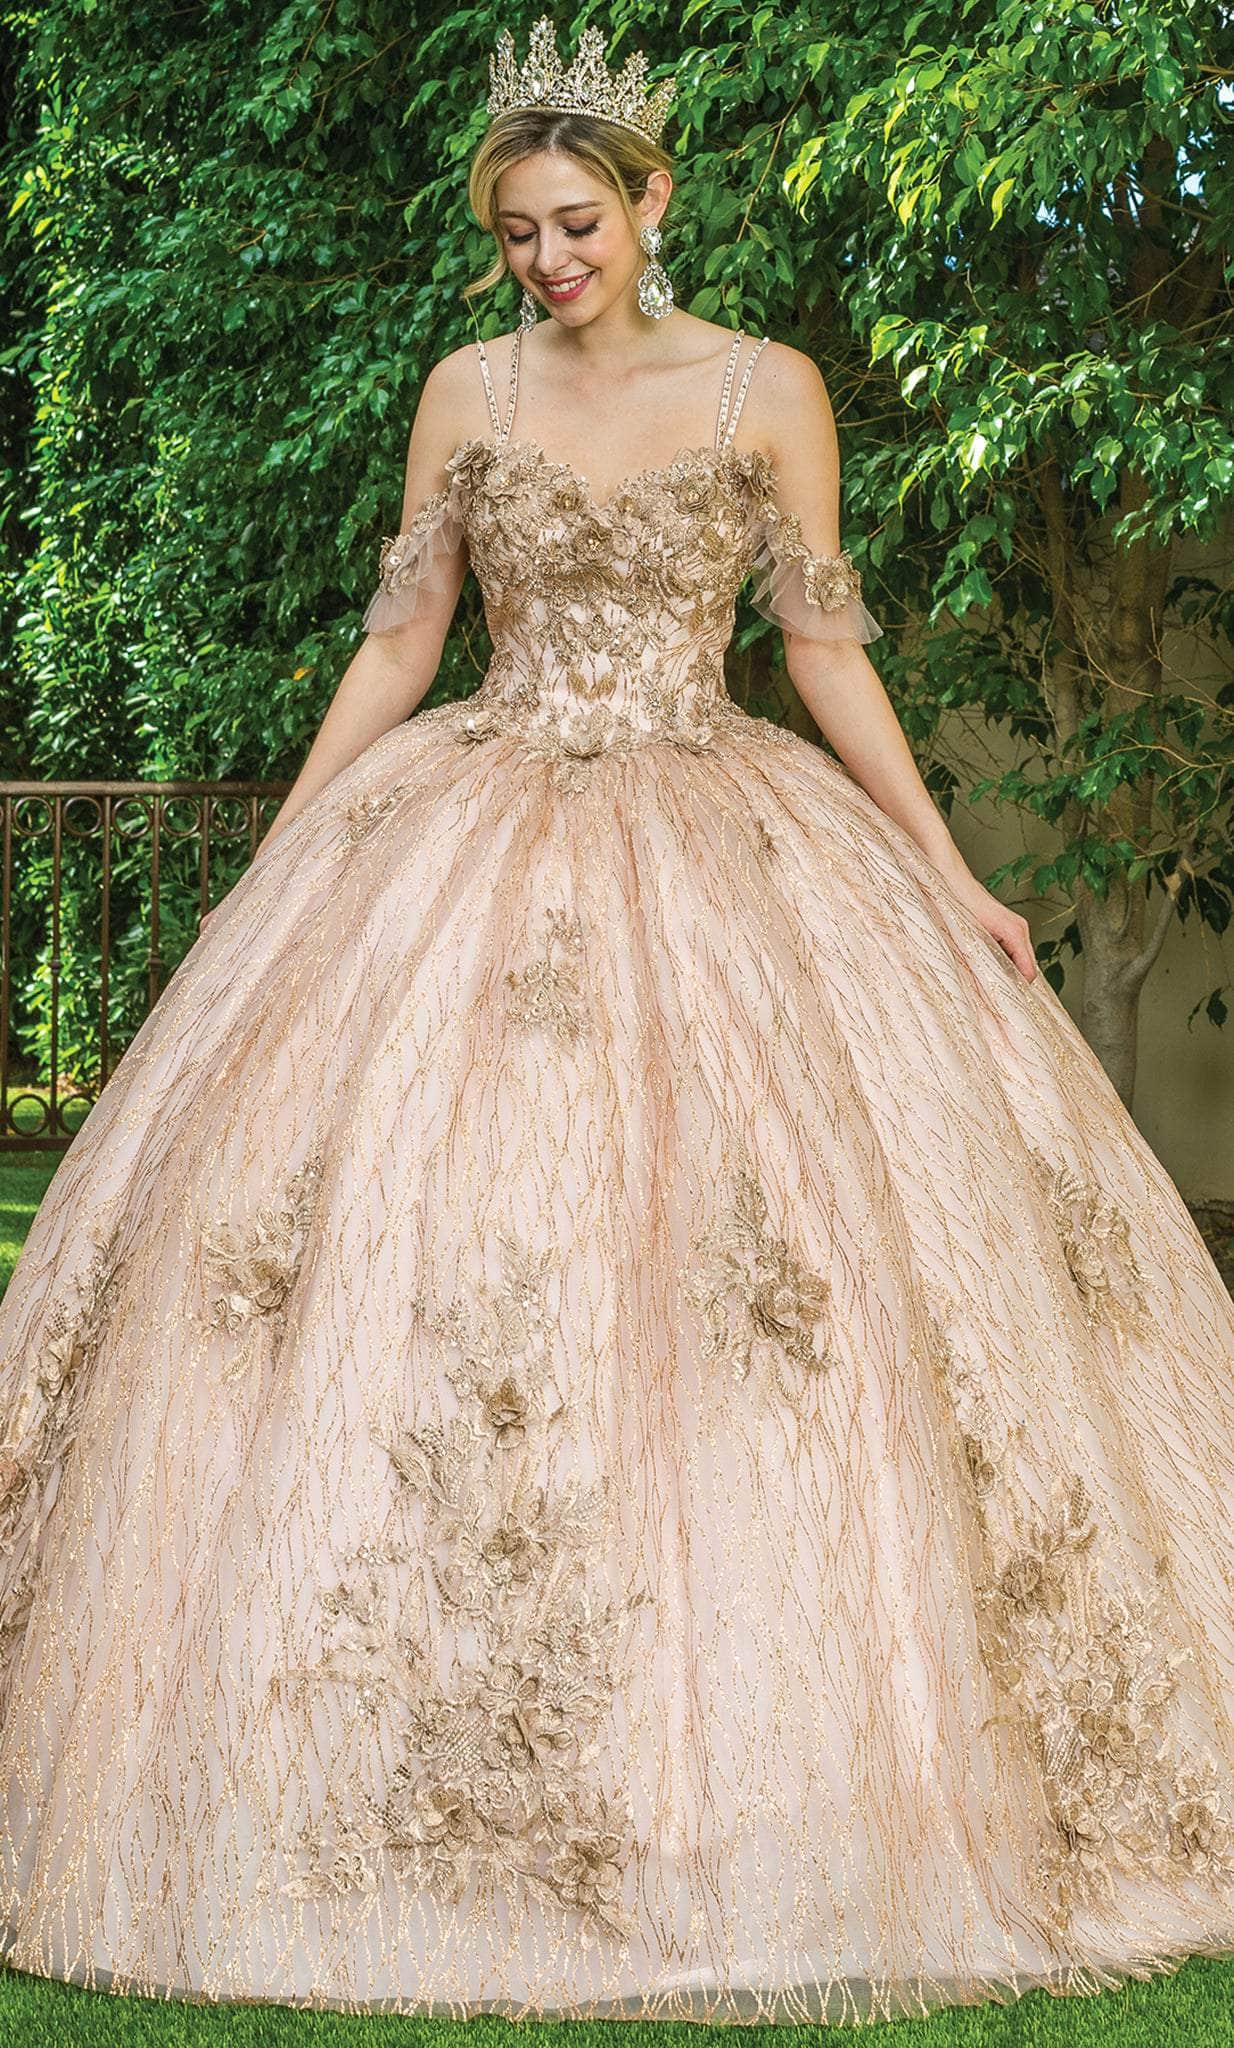 Image of Dancing Queen 1633 - Floral Lace Sweetheart Ballgown